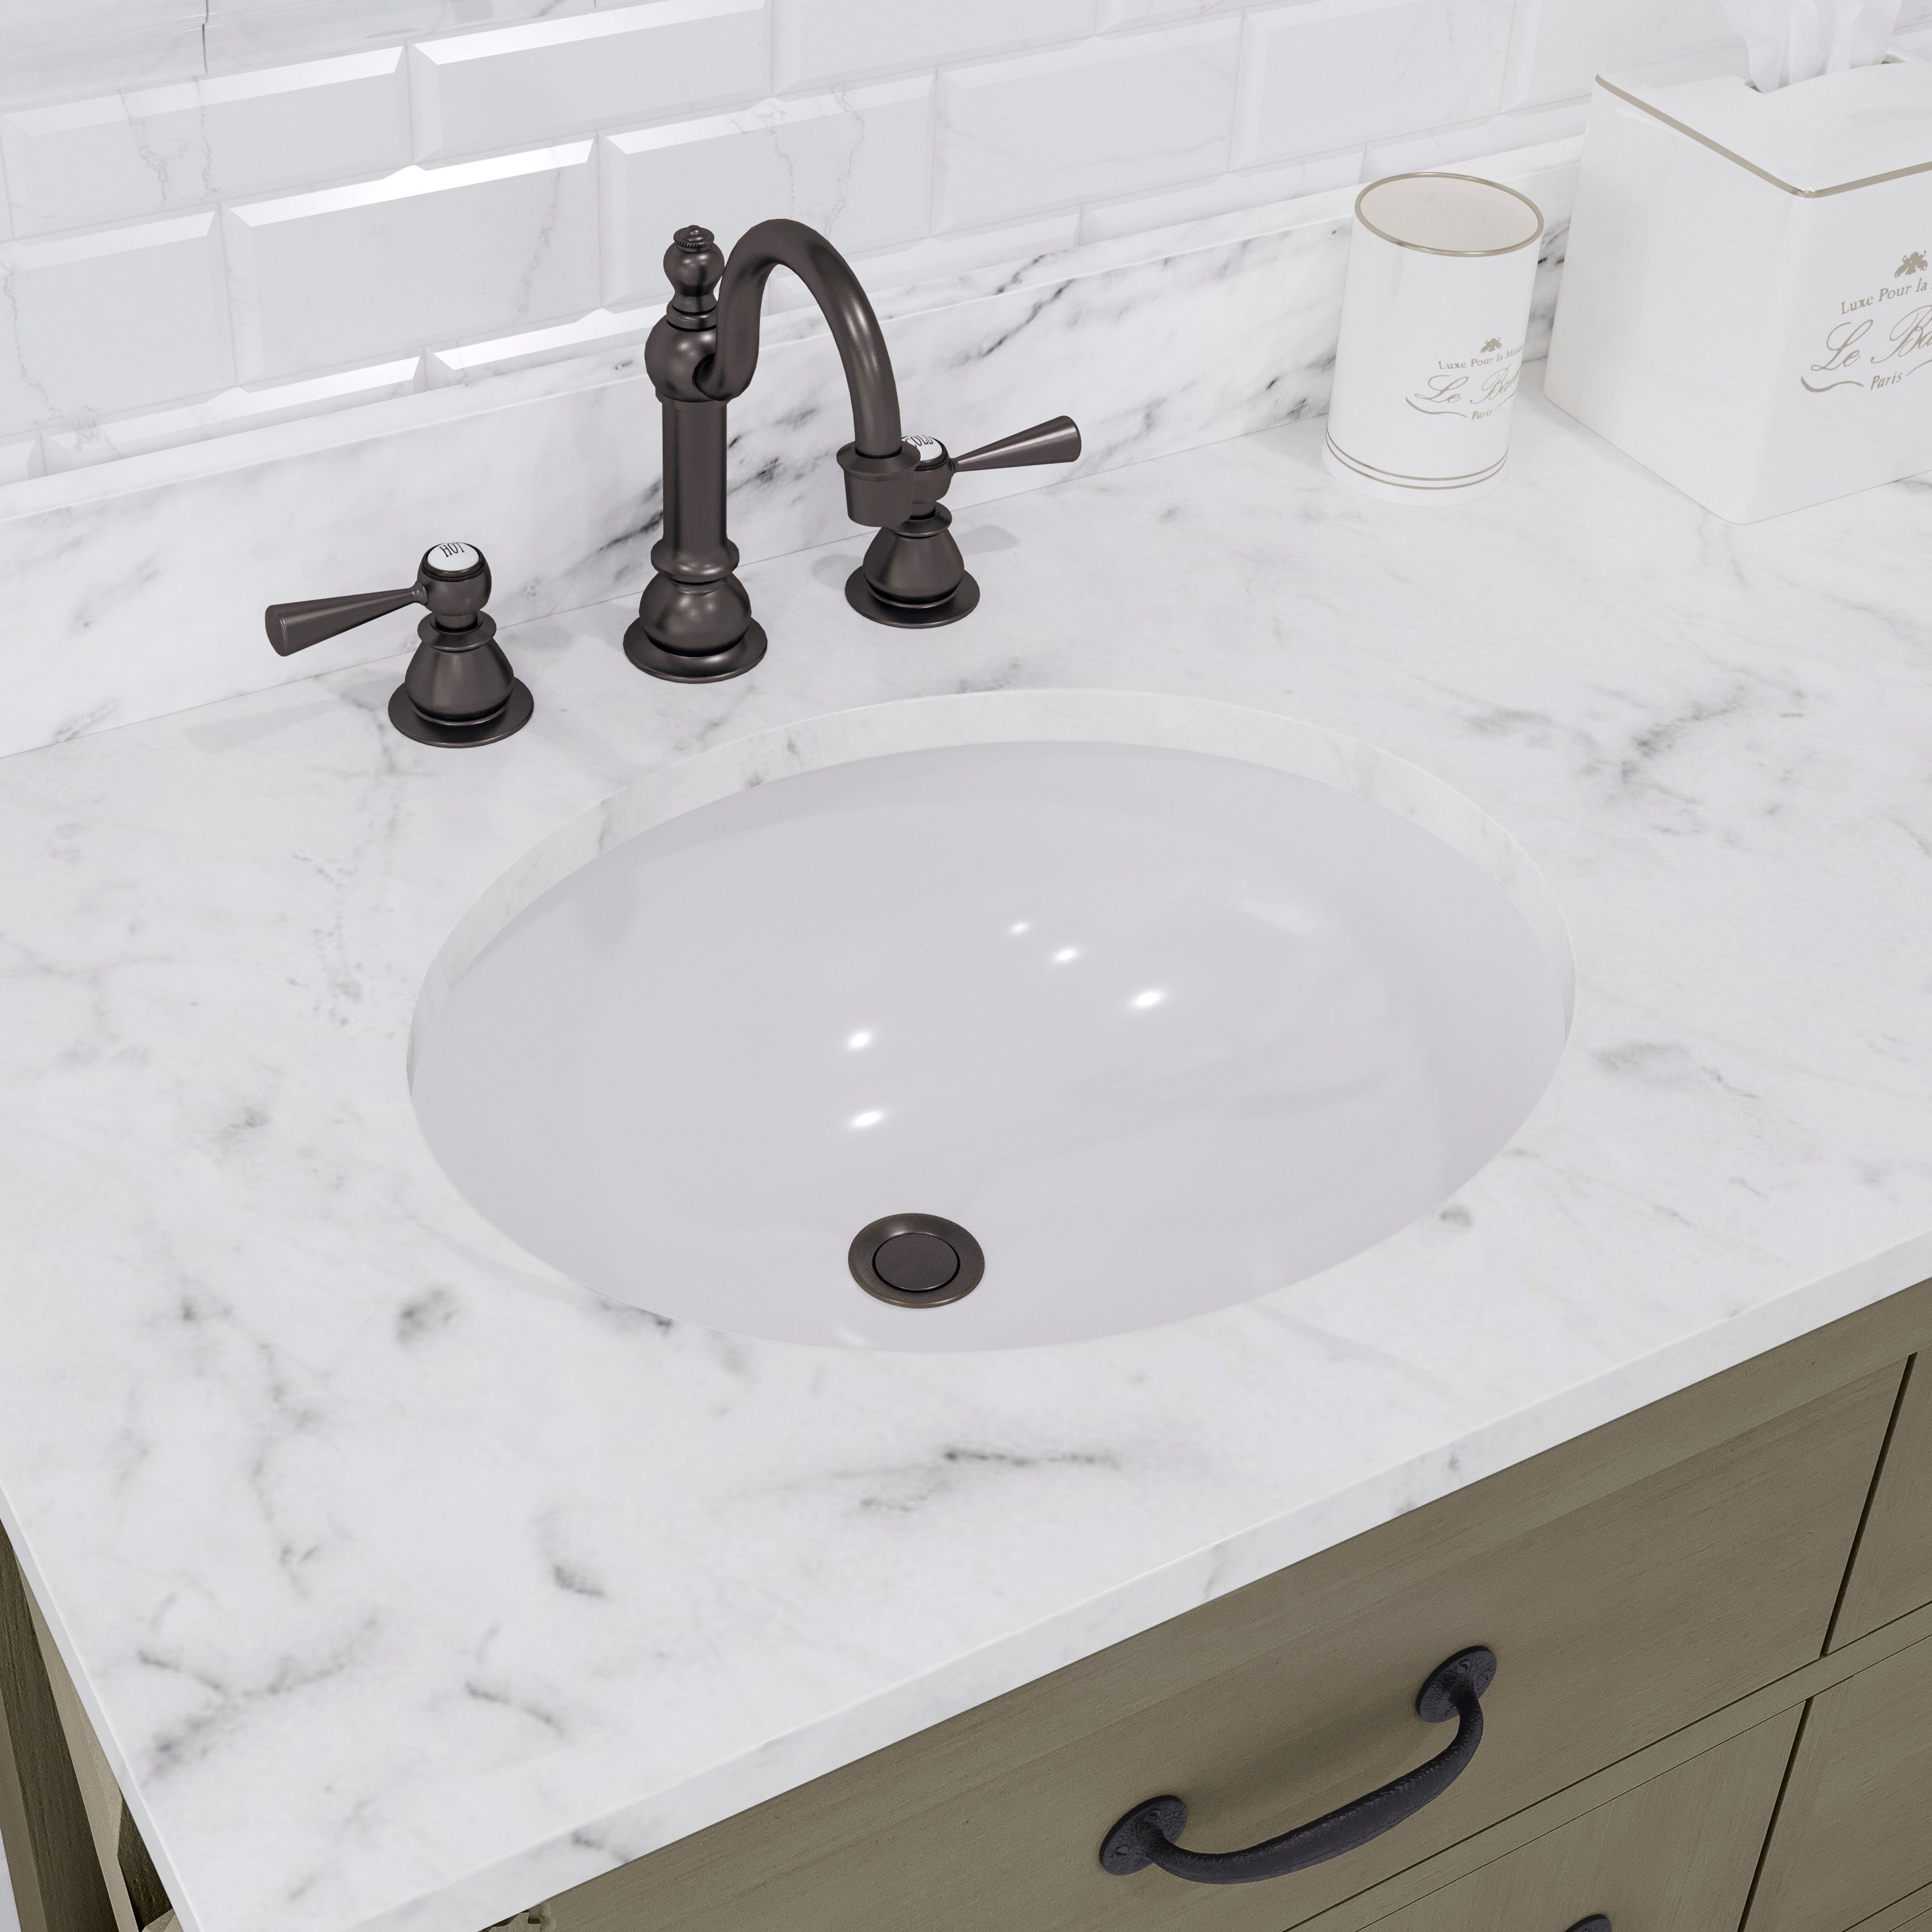 Water Creation | 72 Inch Grizzle Grey Double Sink Bathroom Vanity With Faucets With Carrara White Marble Counter Top From The ABERDEEN Collection | AB72CW03GG-000BX1203